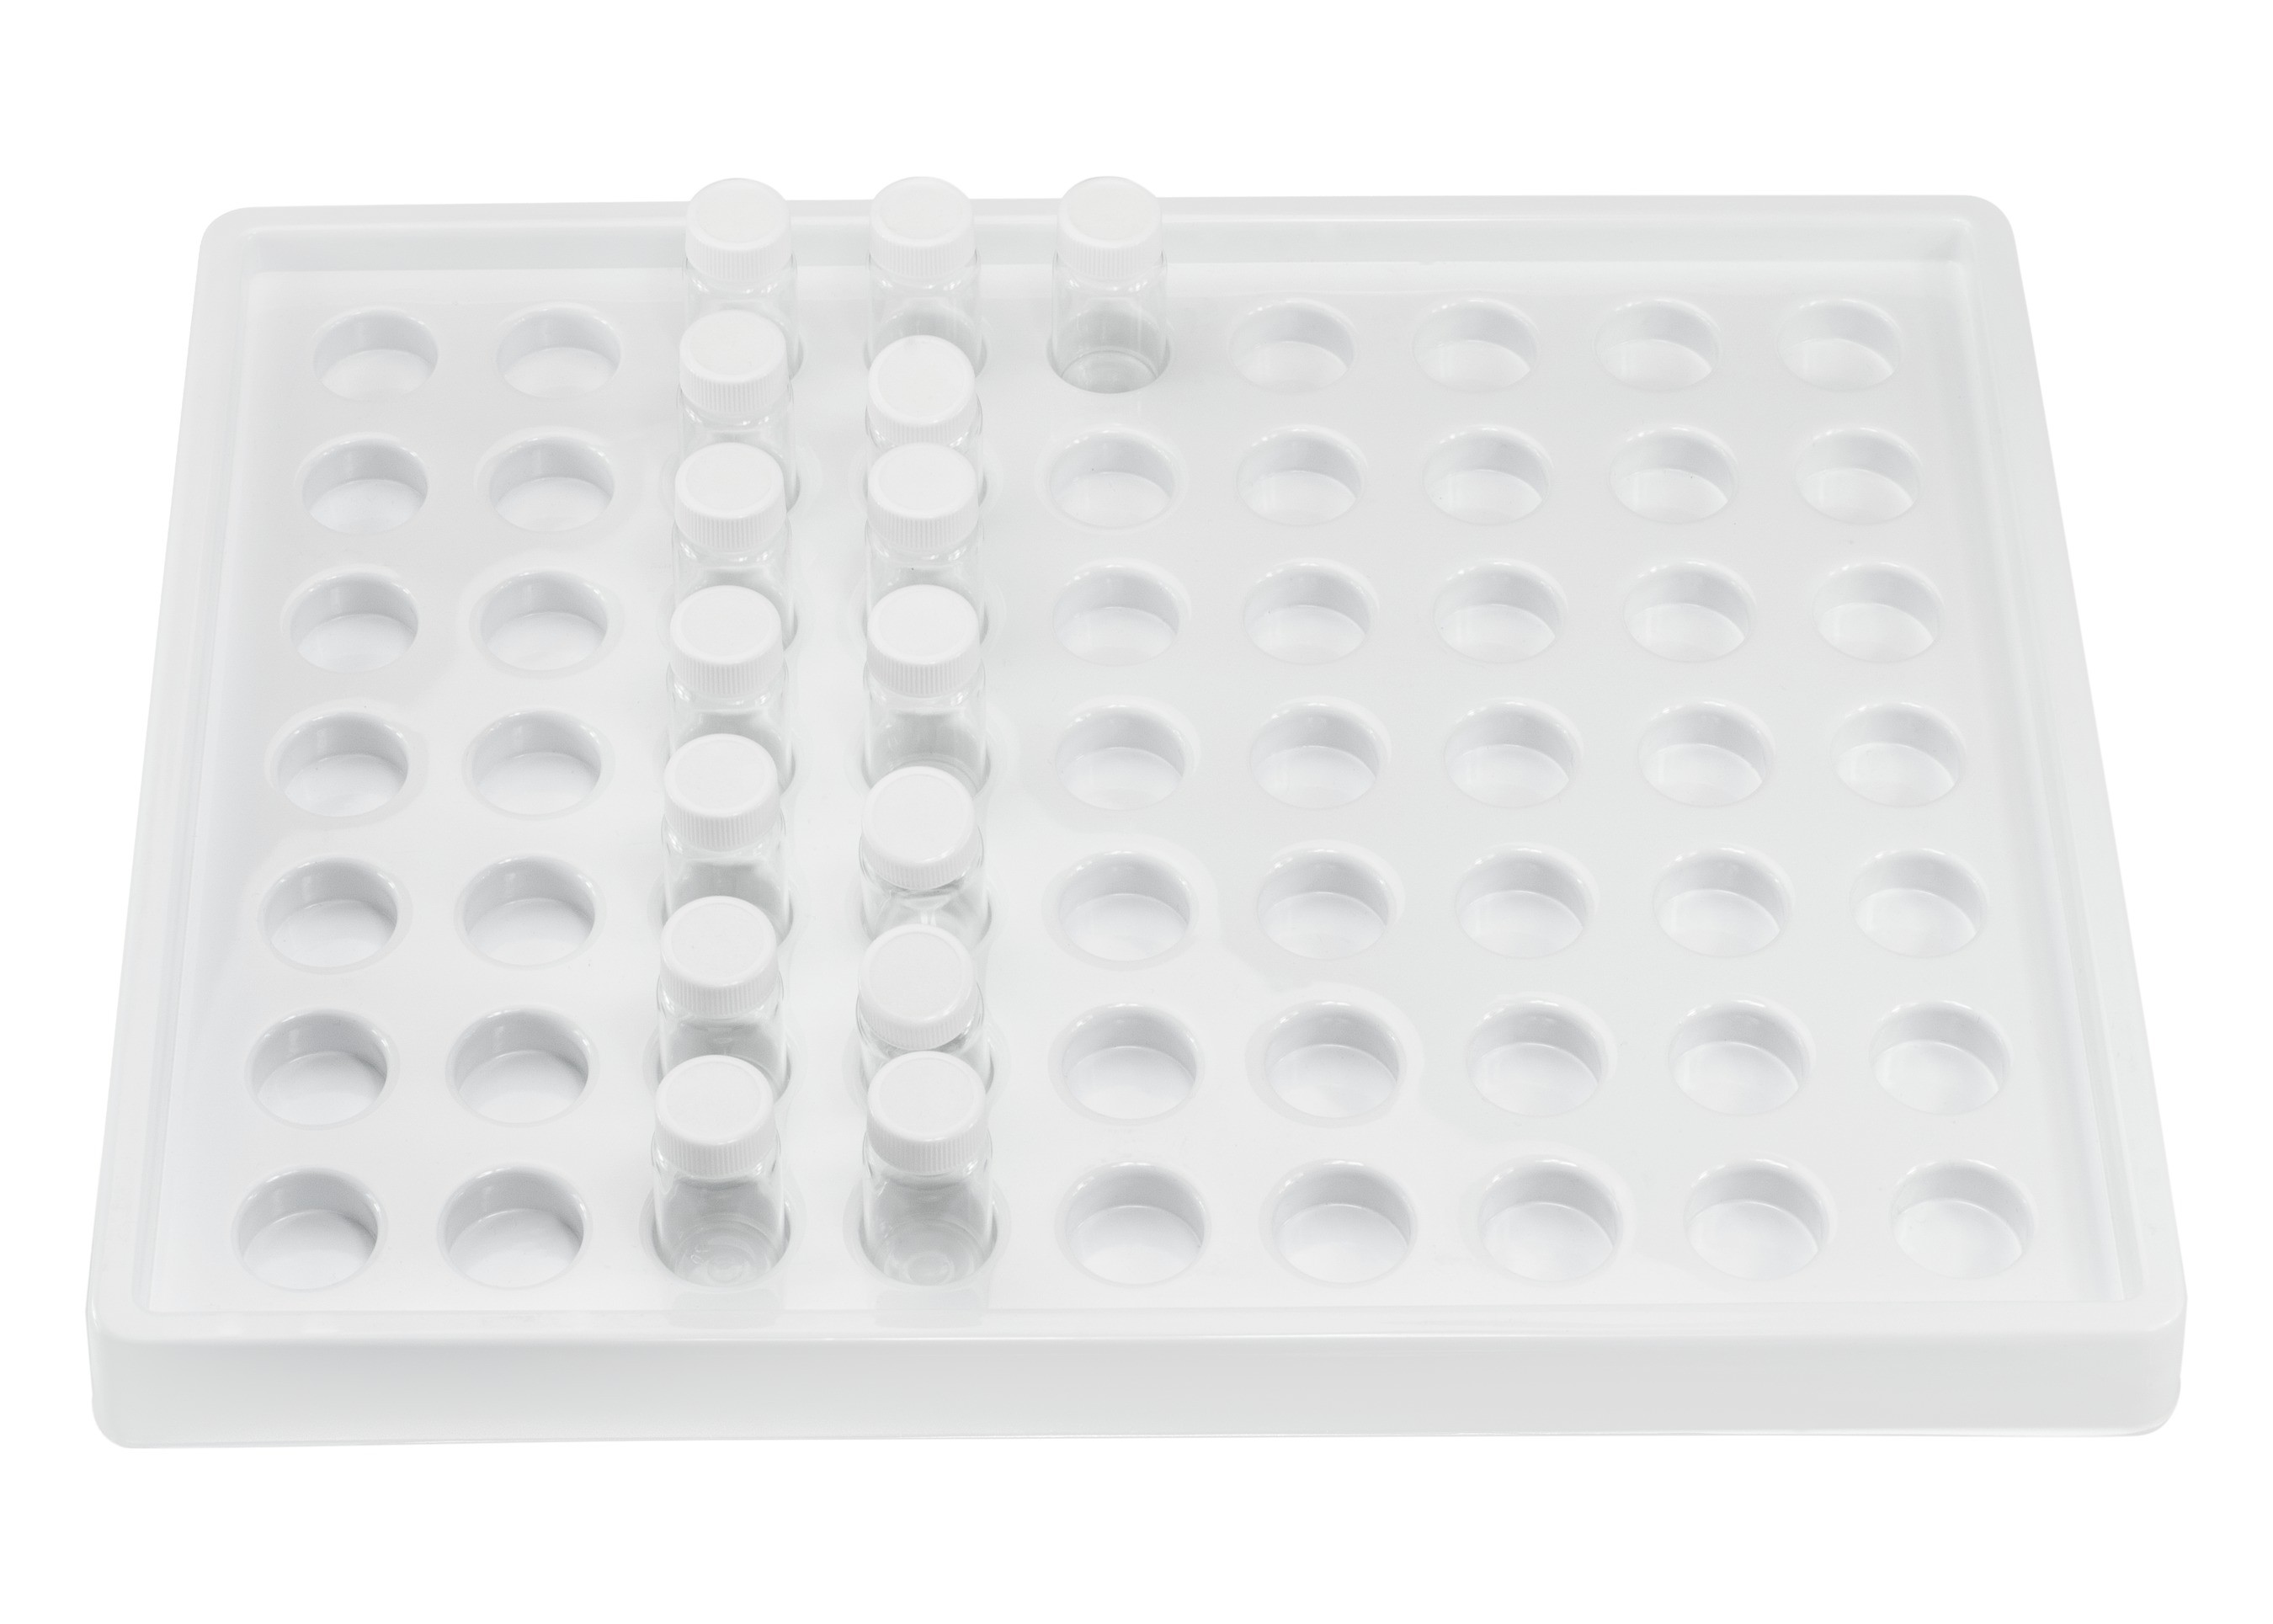 SP Bel-Art Lab Drawer Compartment Tray for Scintillation Vials; 63 Wells, 14 x 17½ x 2¼ in.